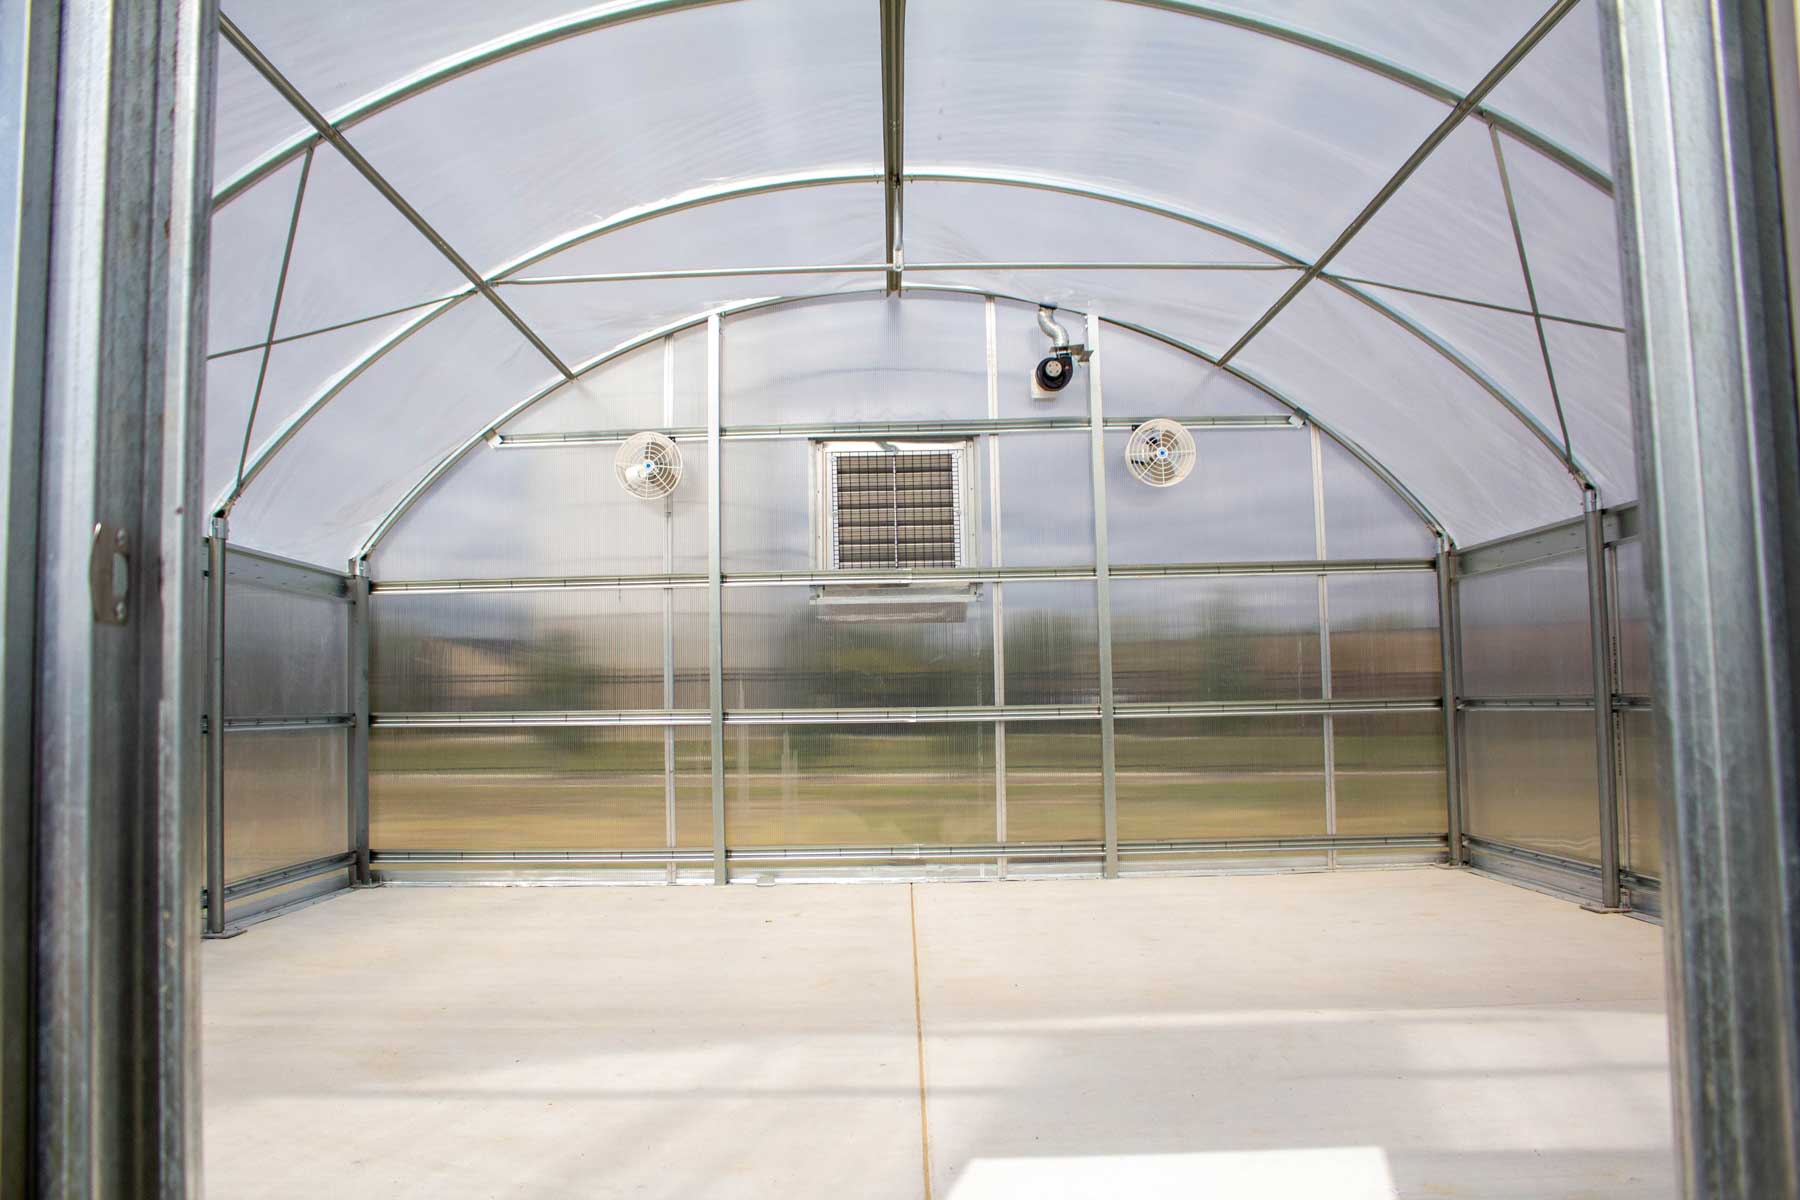 A view of the interior of the new greenhouse showing its ventilation system.